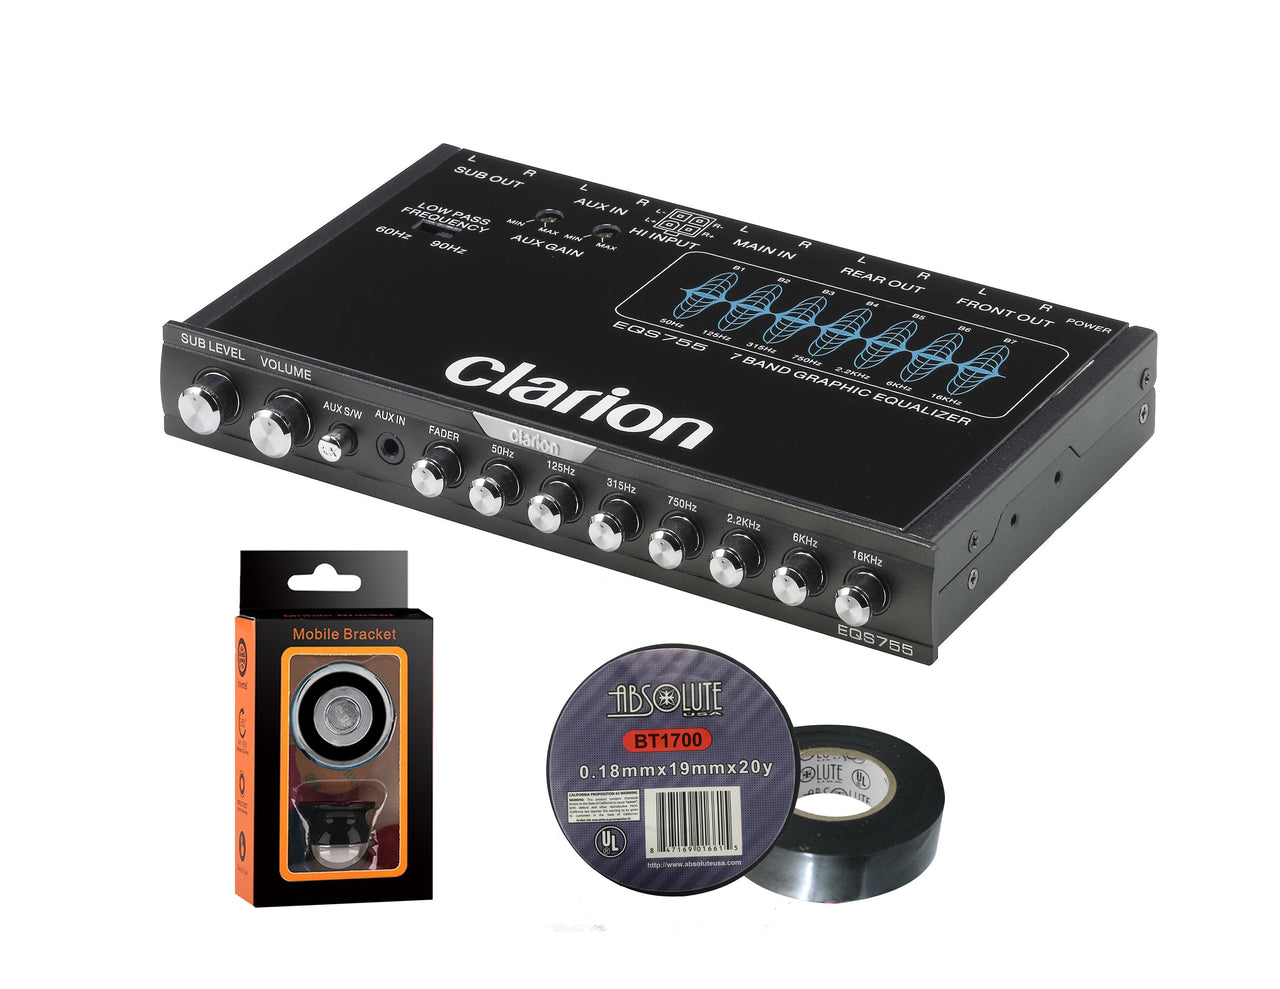 Clarion EQS755 7-Band Car Audio Graphic Equalizer + Free Absolute Electrical Tape+ Phone Holder